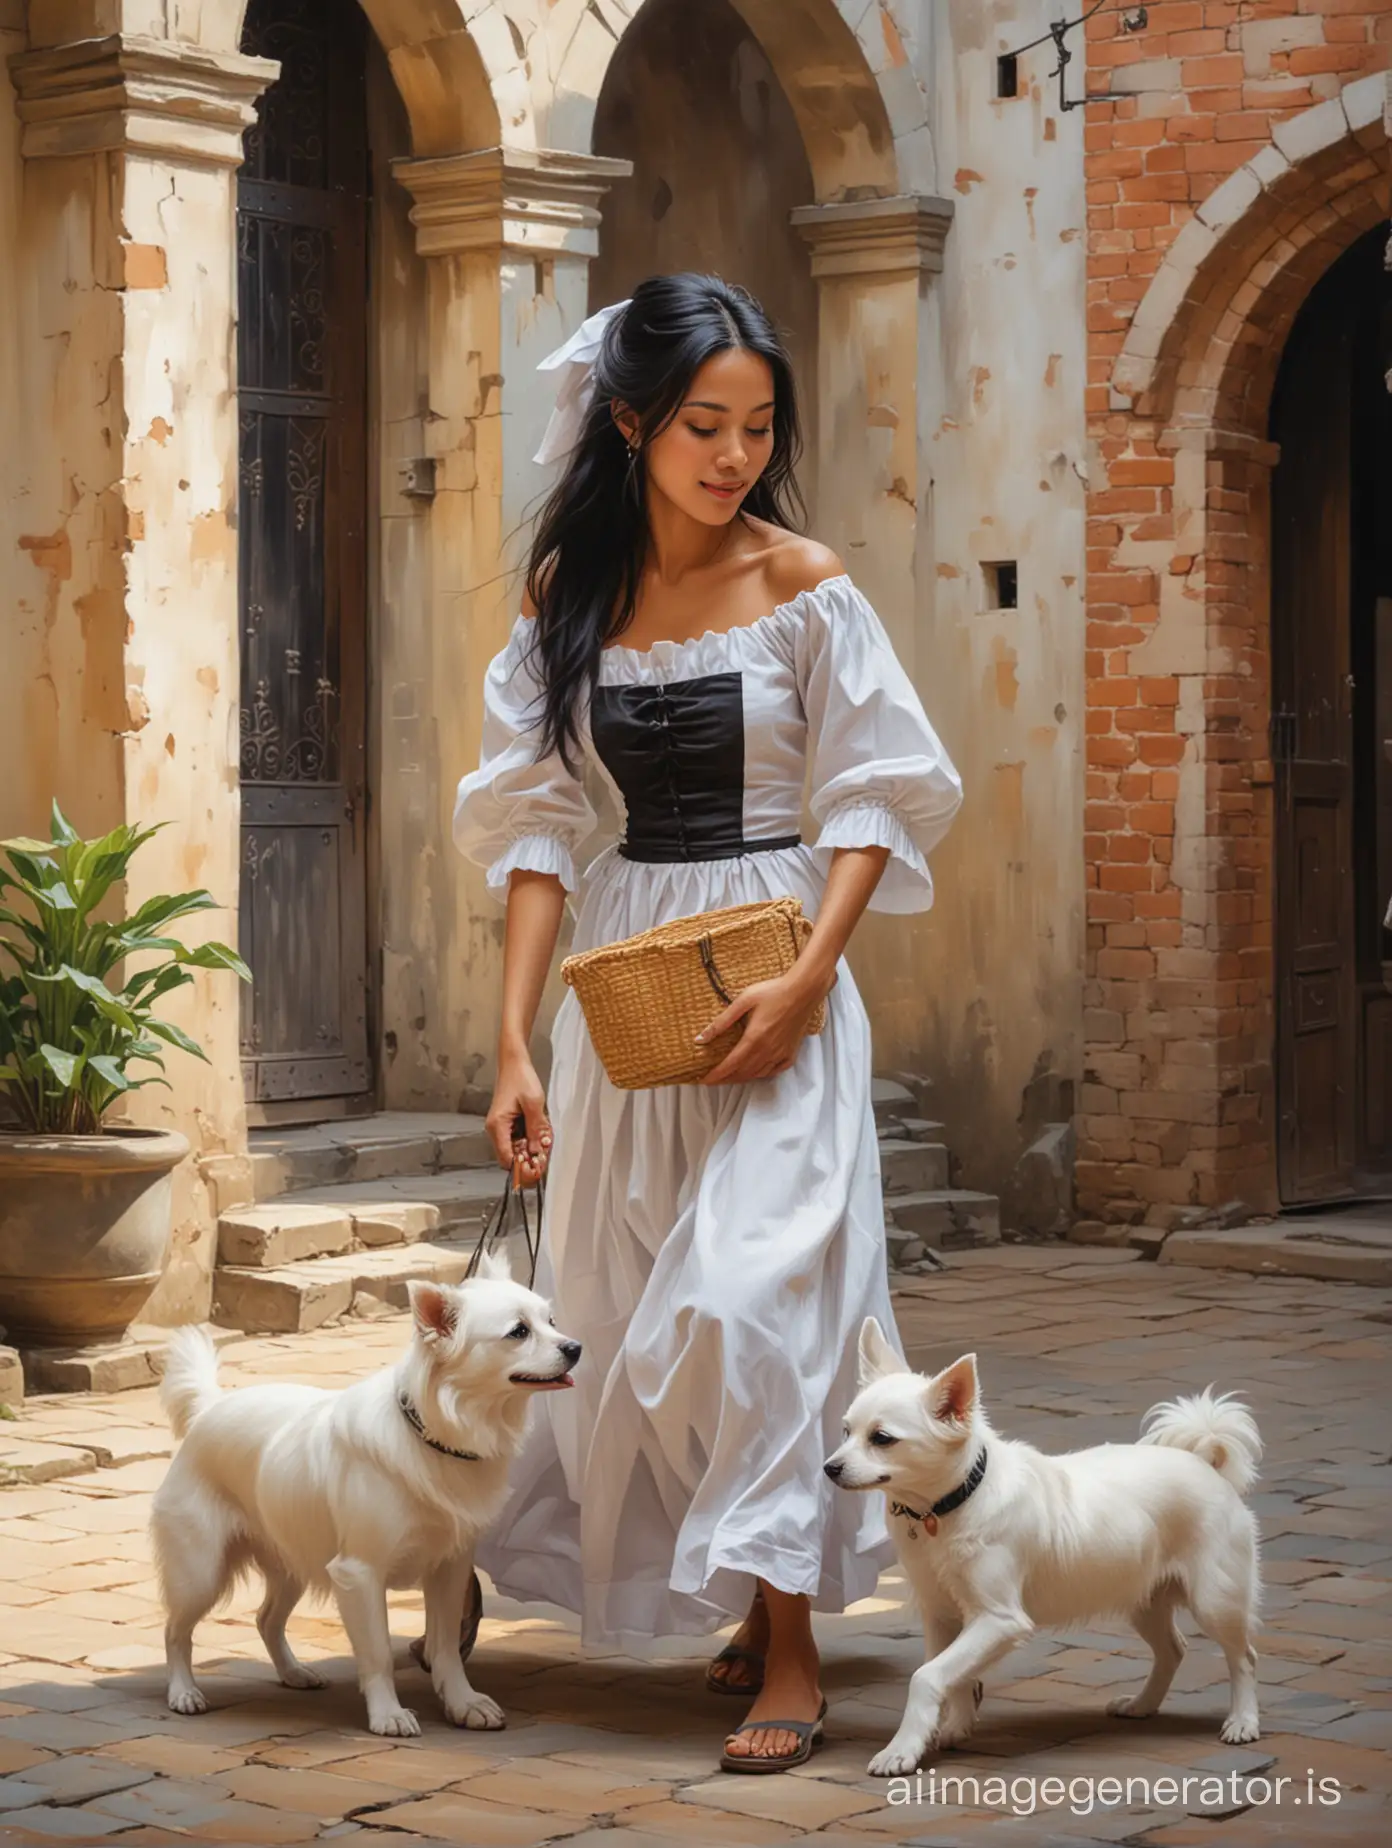 Oil painting of a beautiful tanned Vietnamese maid with long black hair and small breasts playing with a cute white dog in a castle courtyard